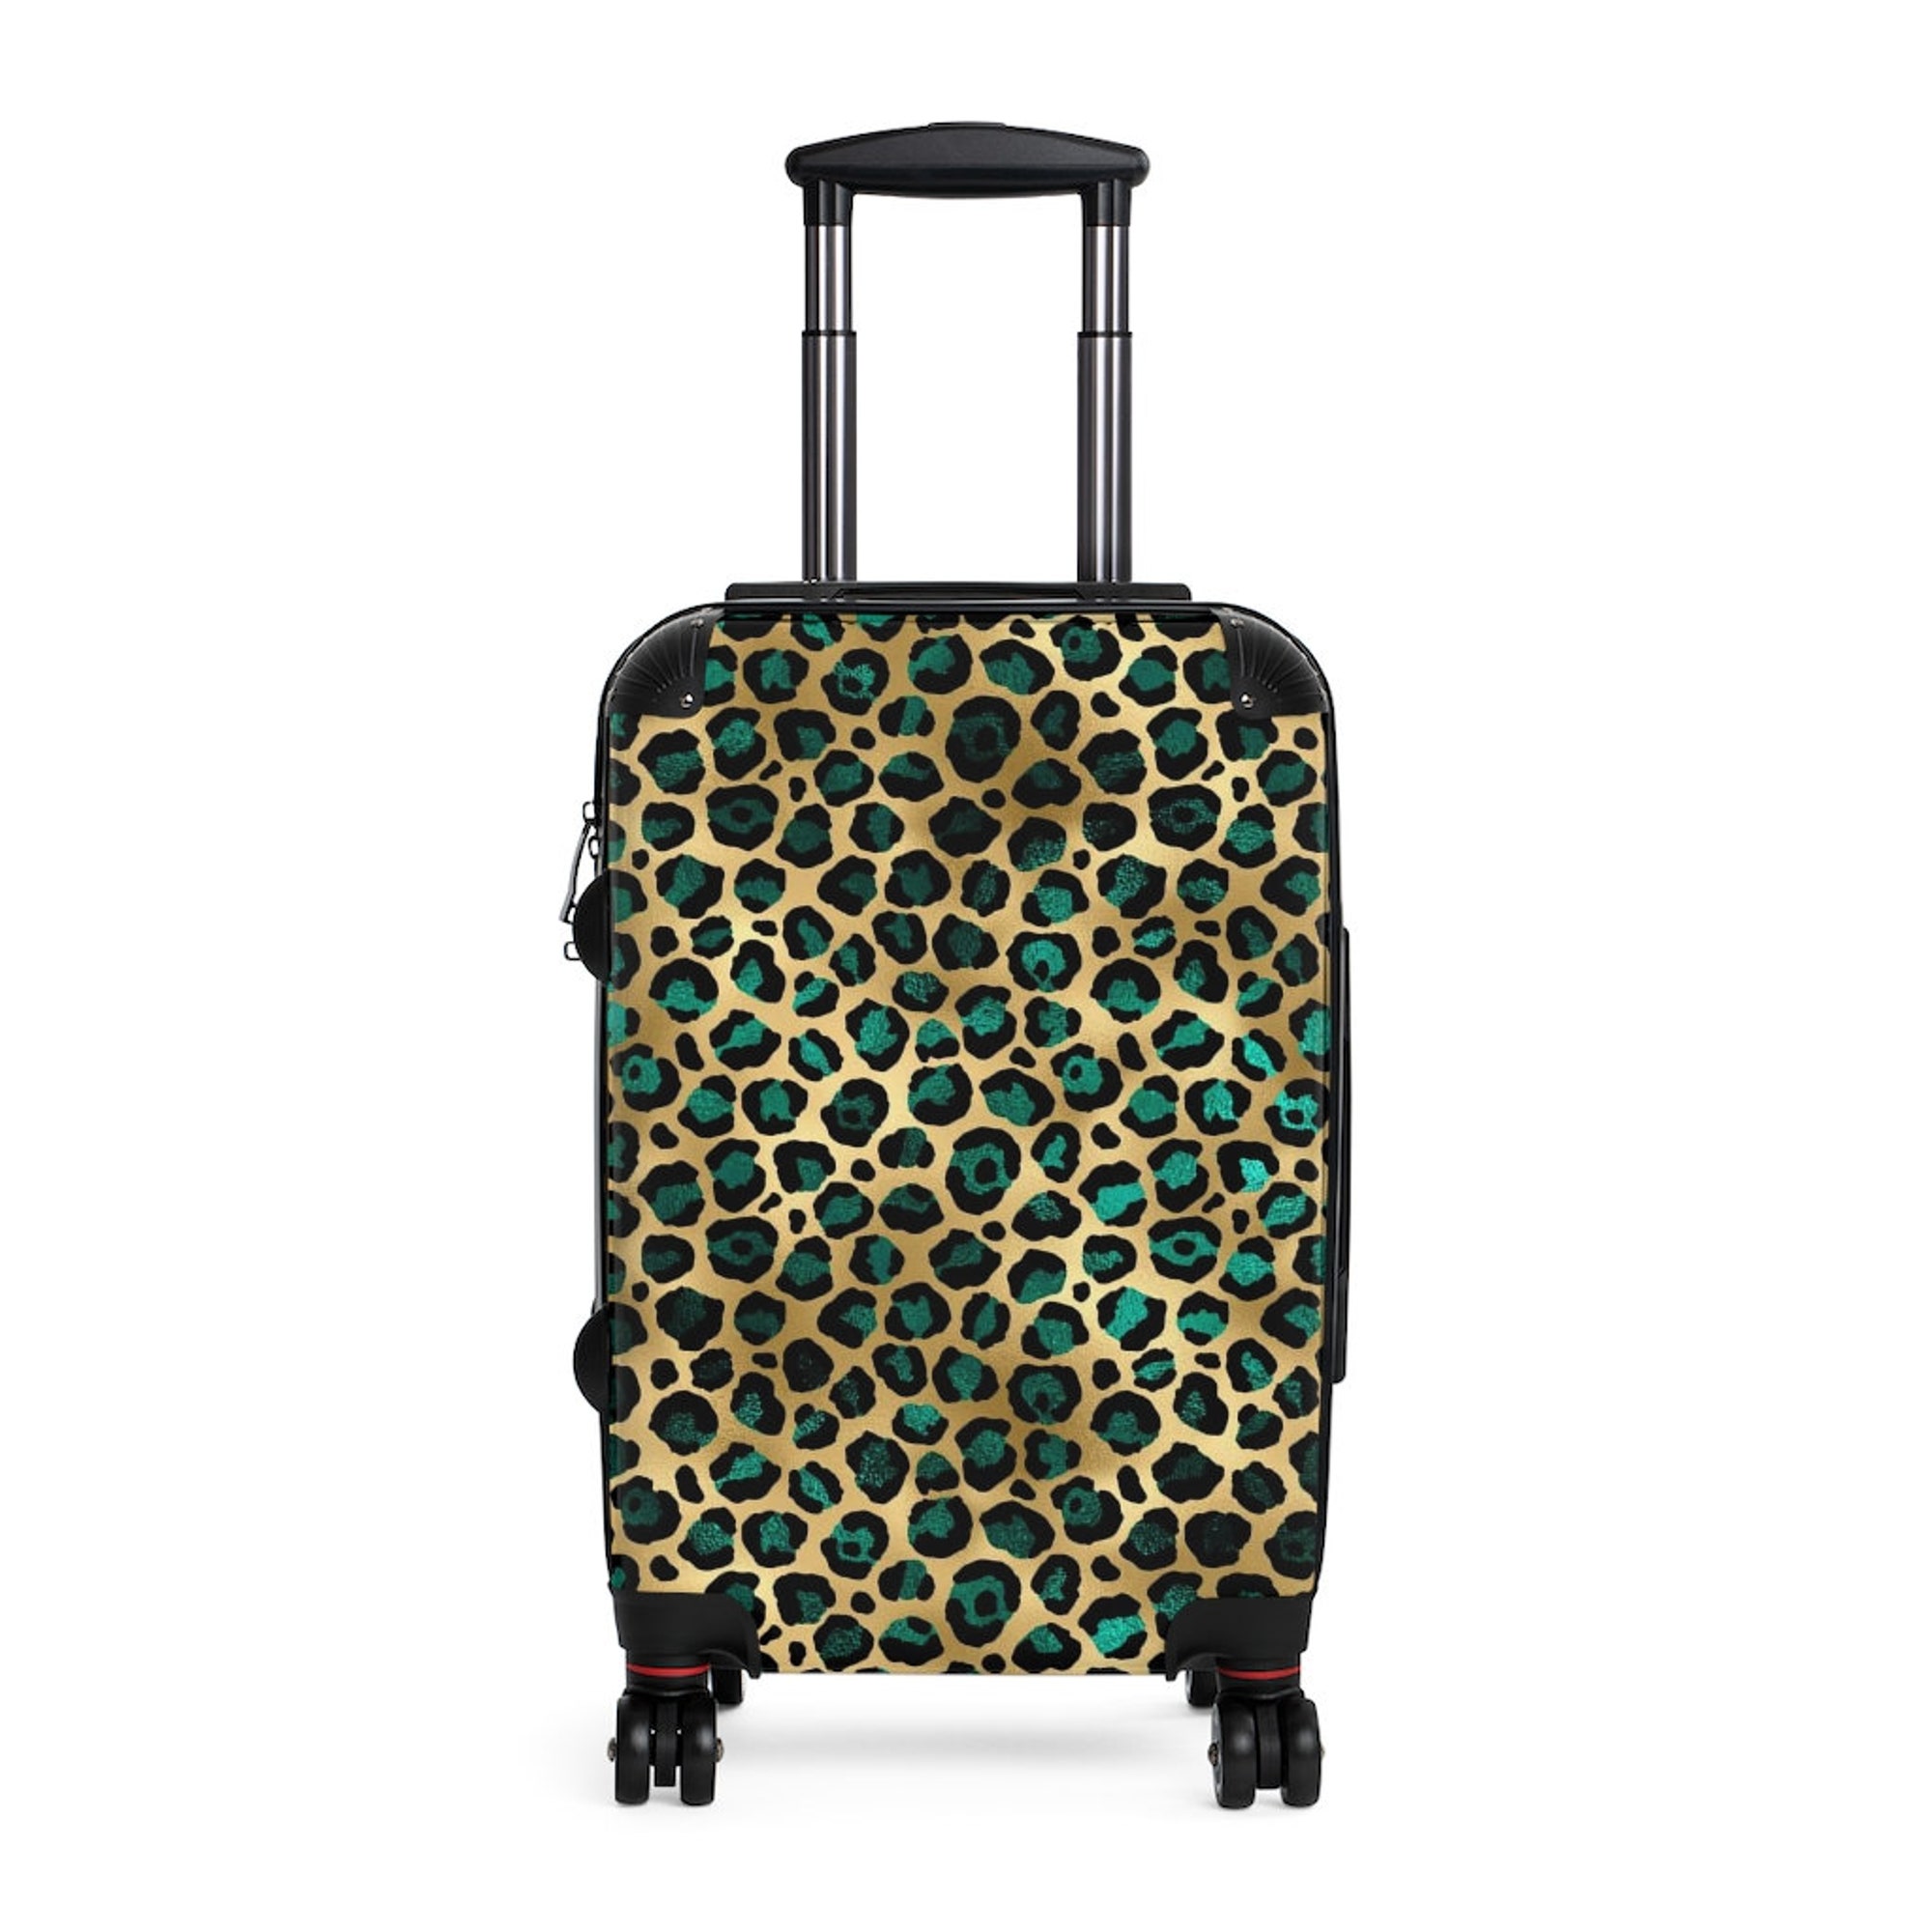 The Green & Gold Leopard Suitcase